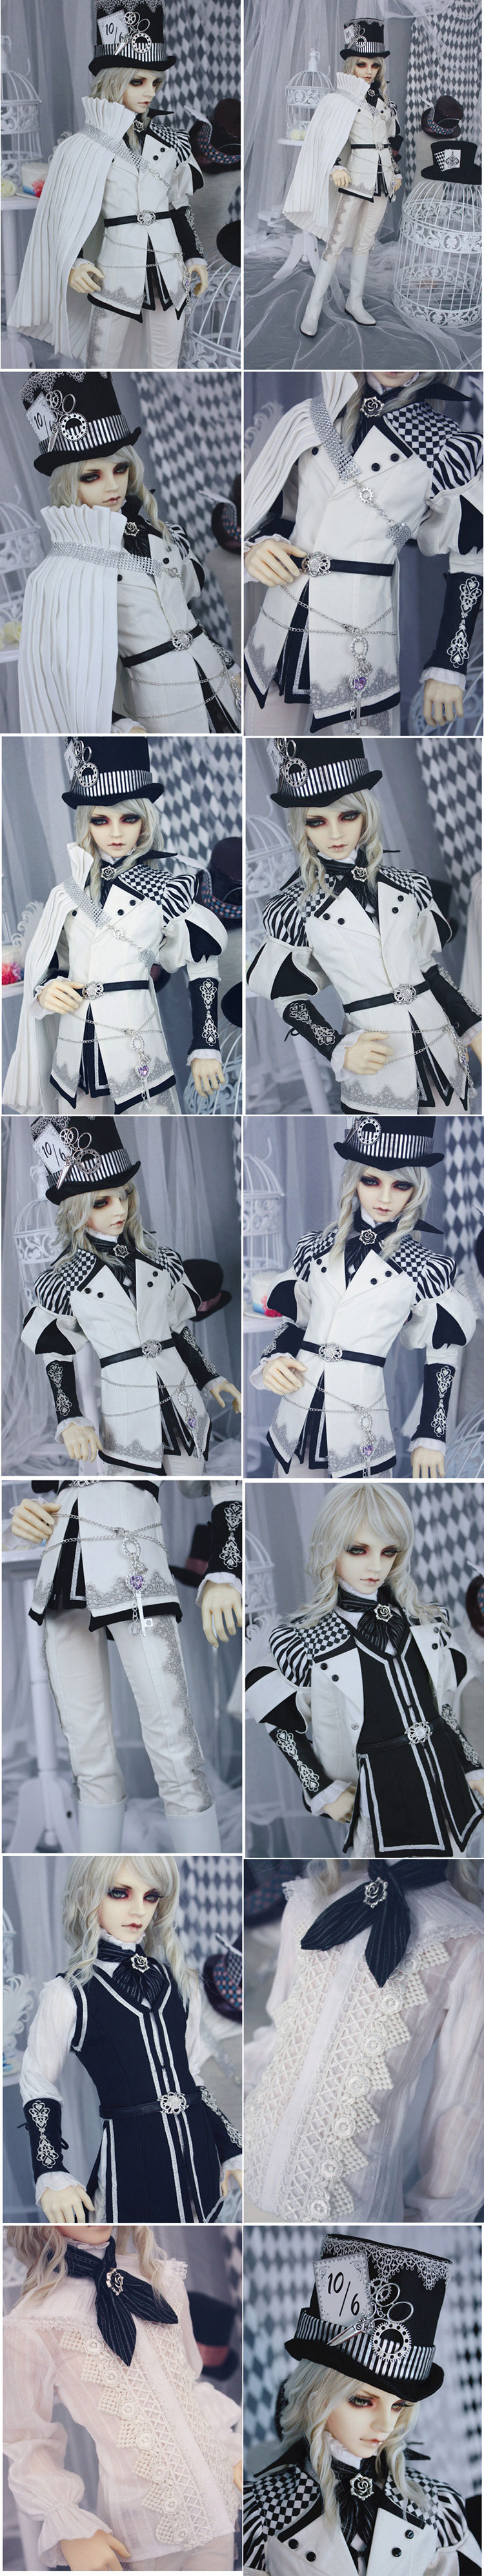 Bjd Clothes Costume Set The Mad Hatter Limited Edition for SD10/SD13/SD17 Ball-jointed Doll